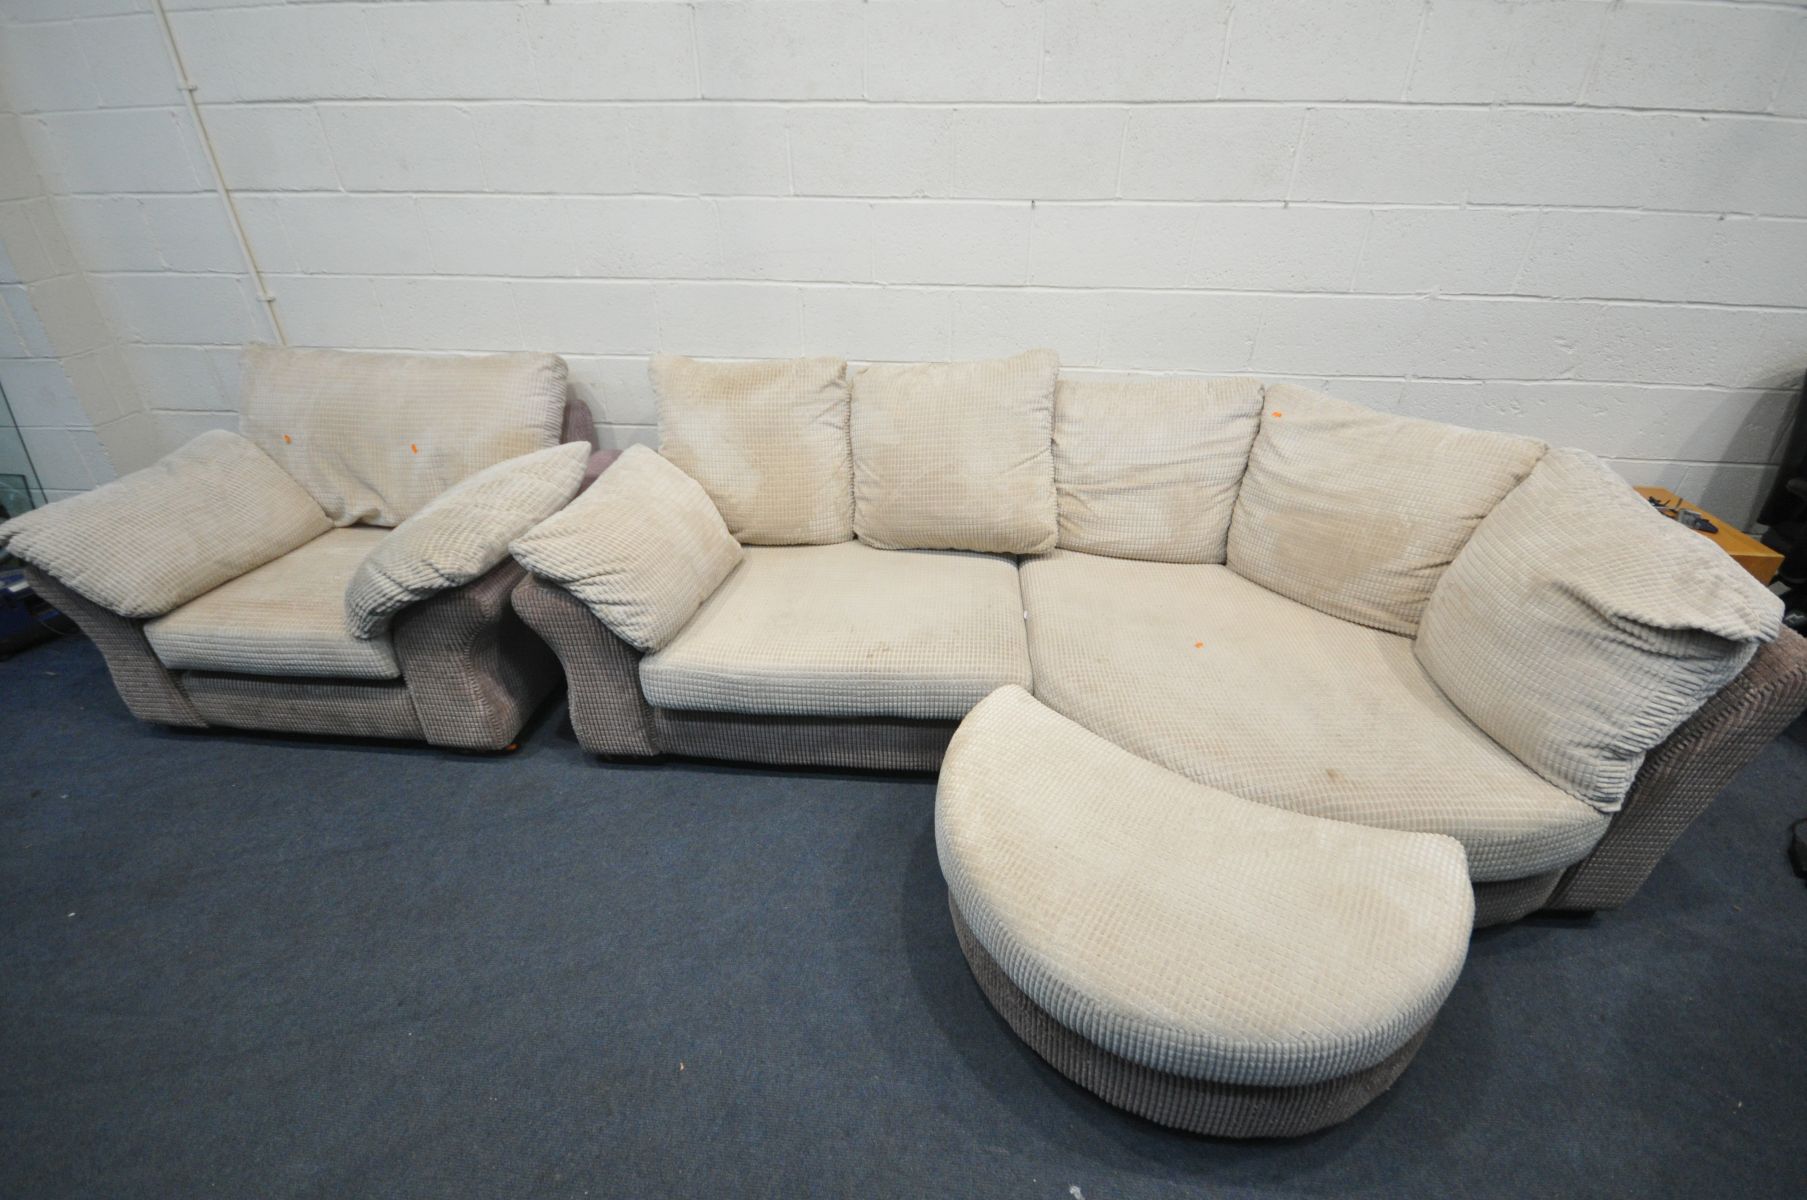 A DFS CREAM AND BROWN UPHOLSTERED CORNER SOFA, length 258cm x depth 126cm x height 80cm and a